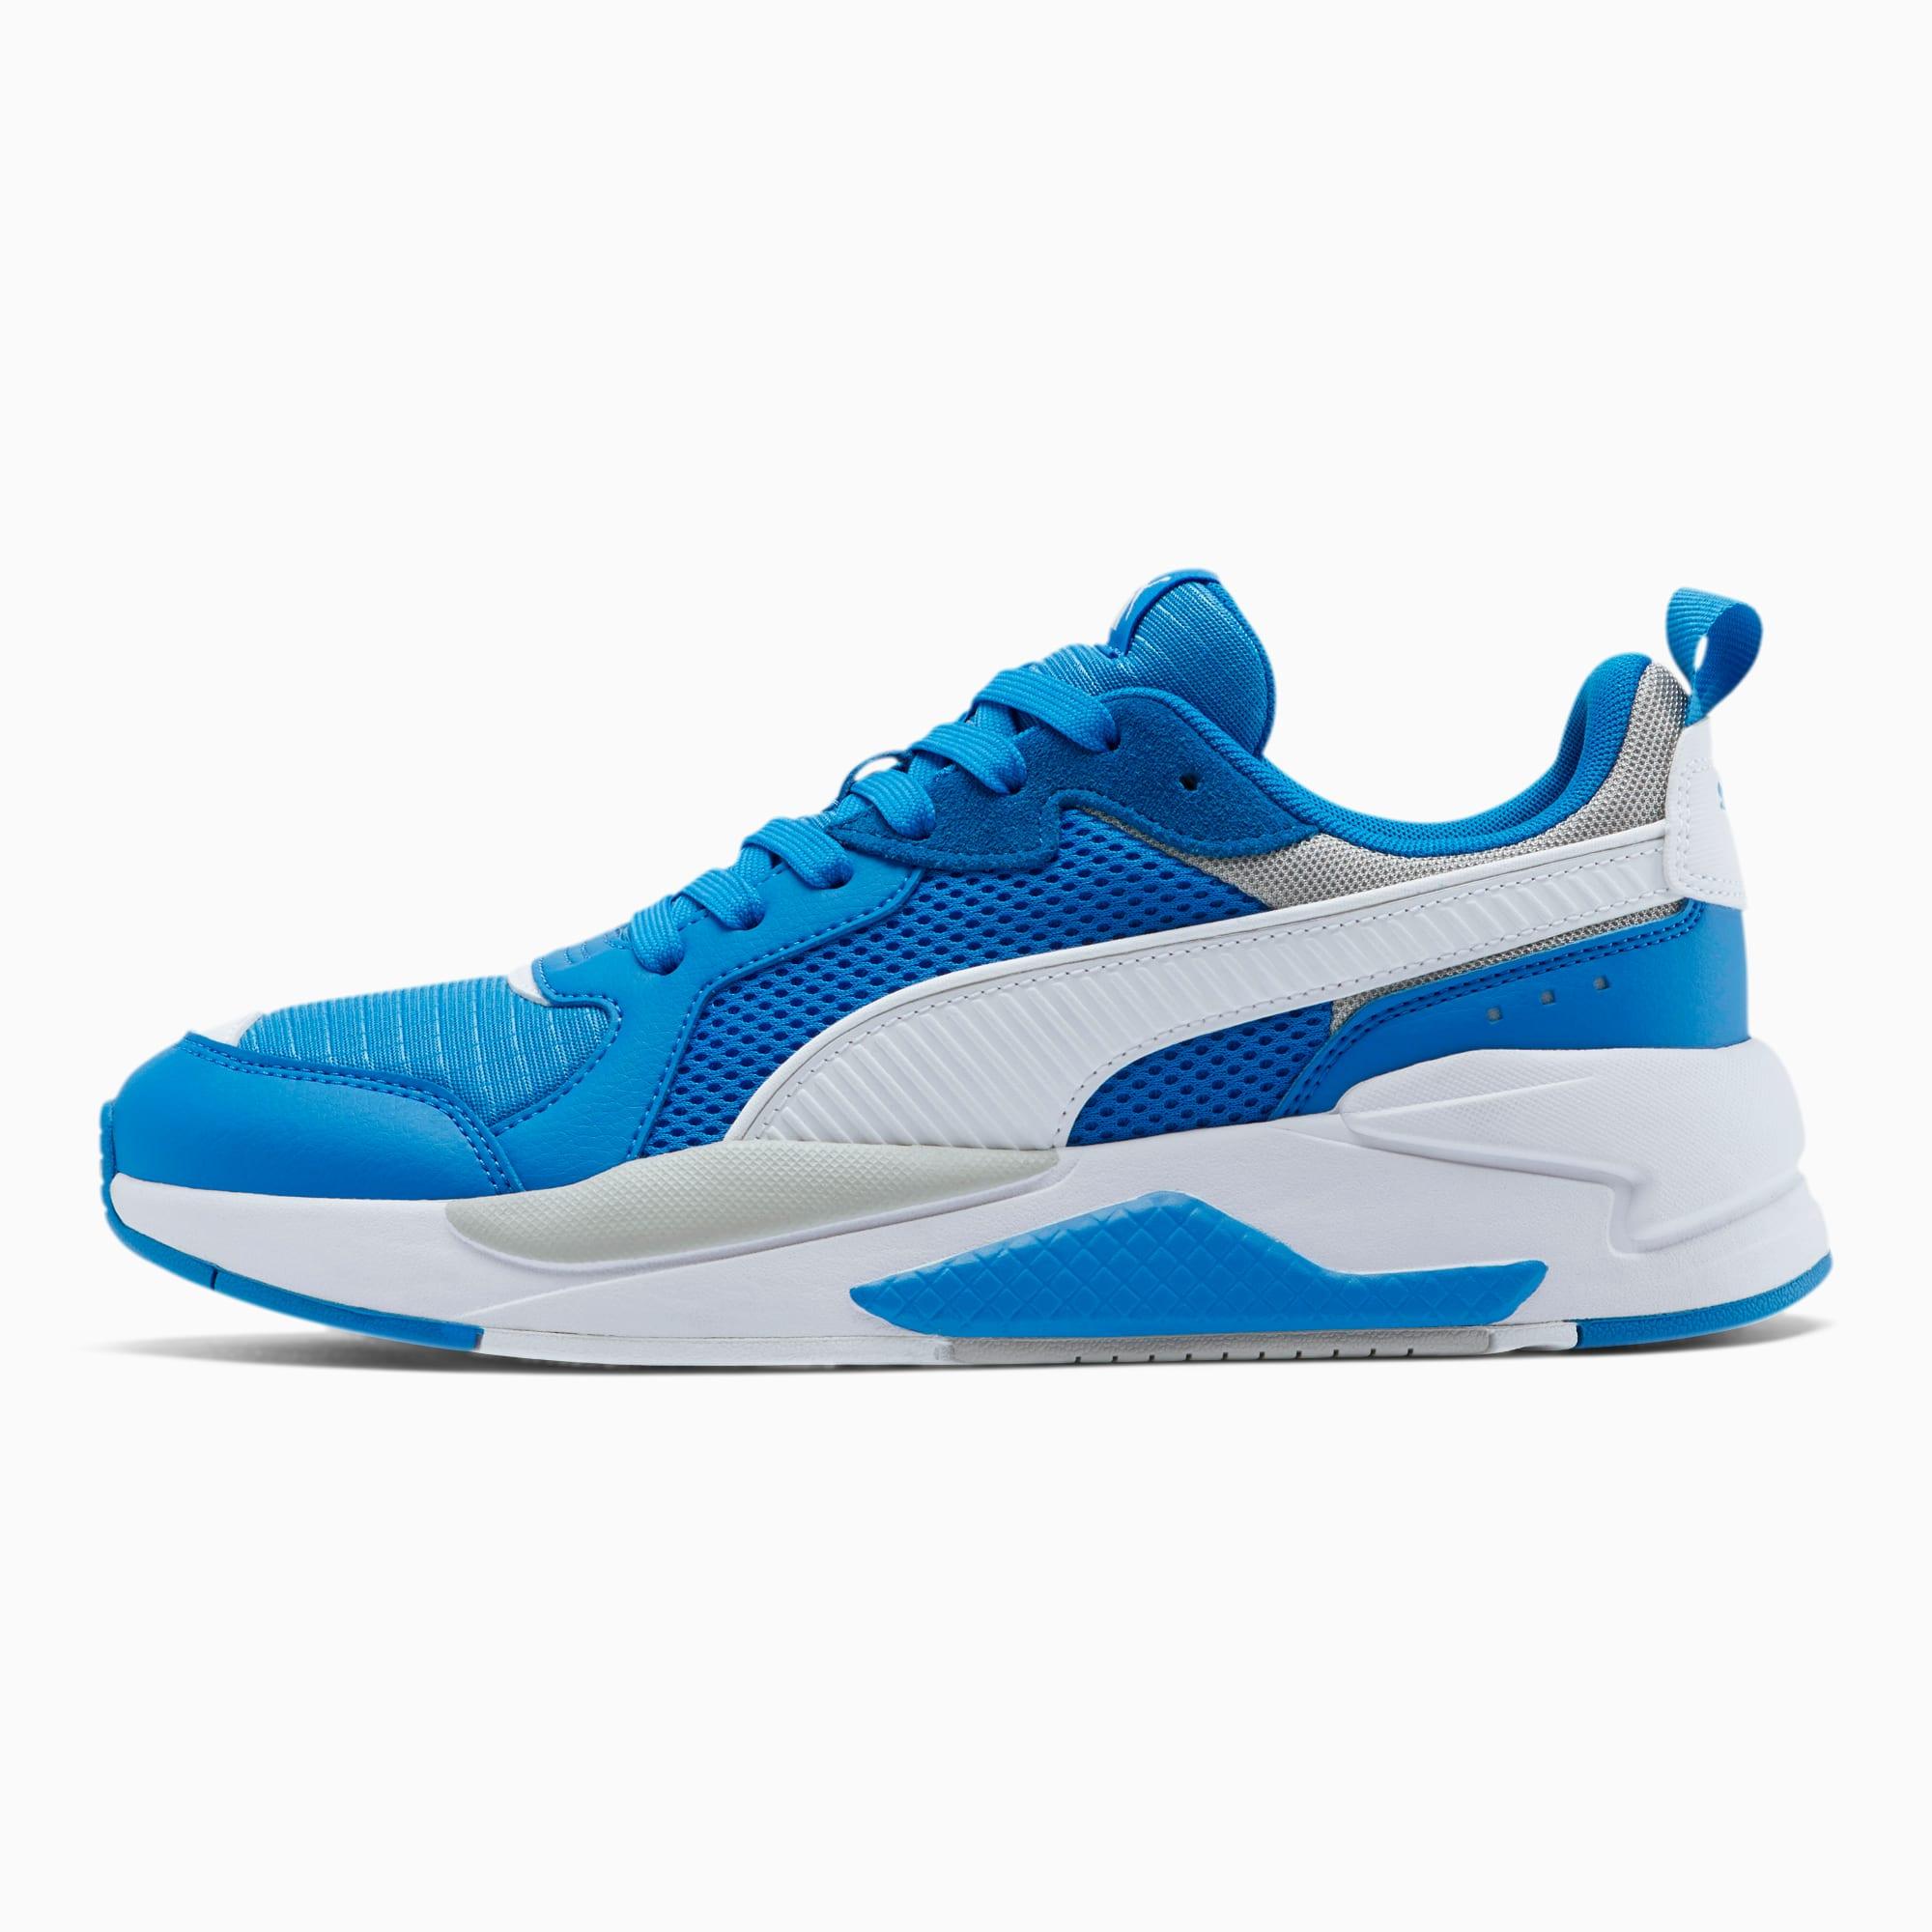 PUMA Suede X-ray Colorblock Sneakers in 